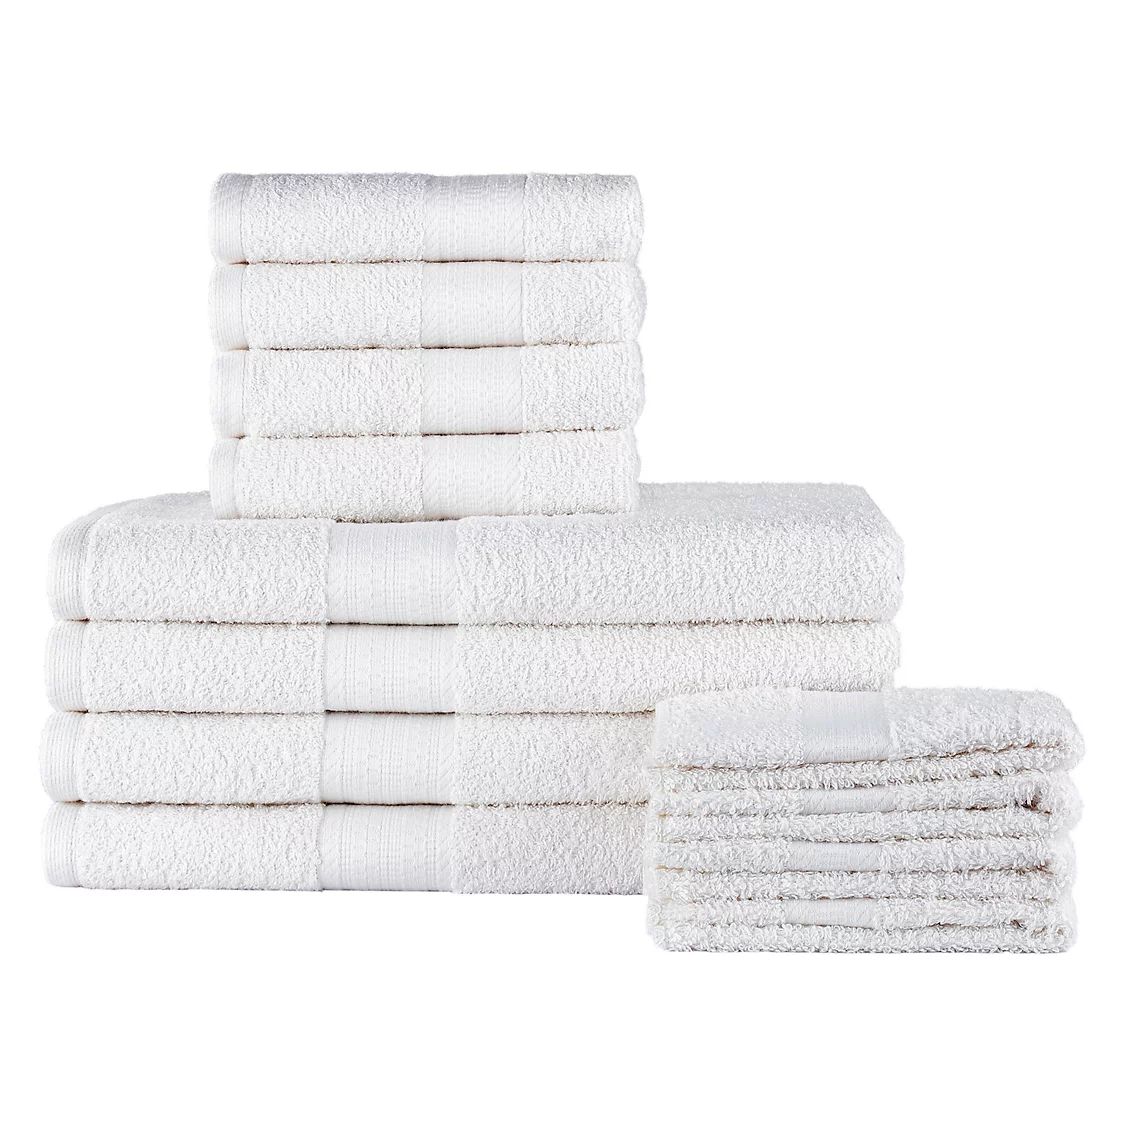 The Big One® 12-piece Bath Towel Value Pack | Kohl's